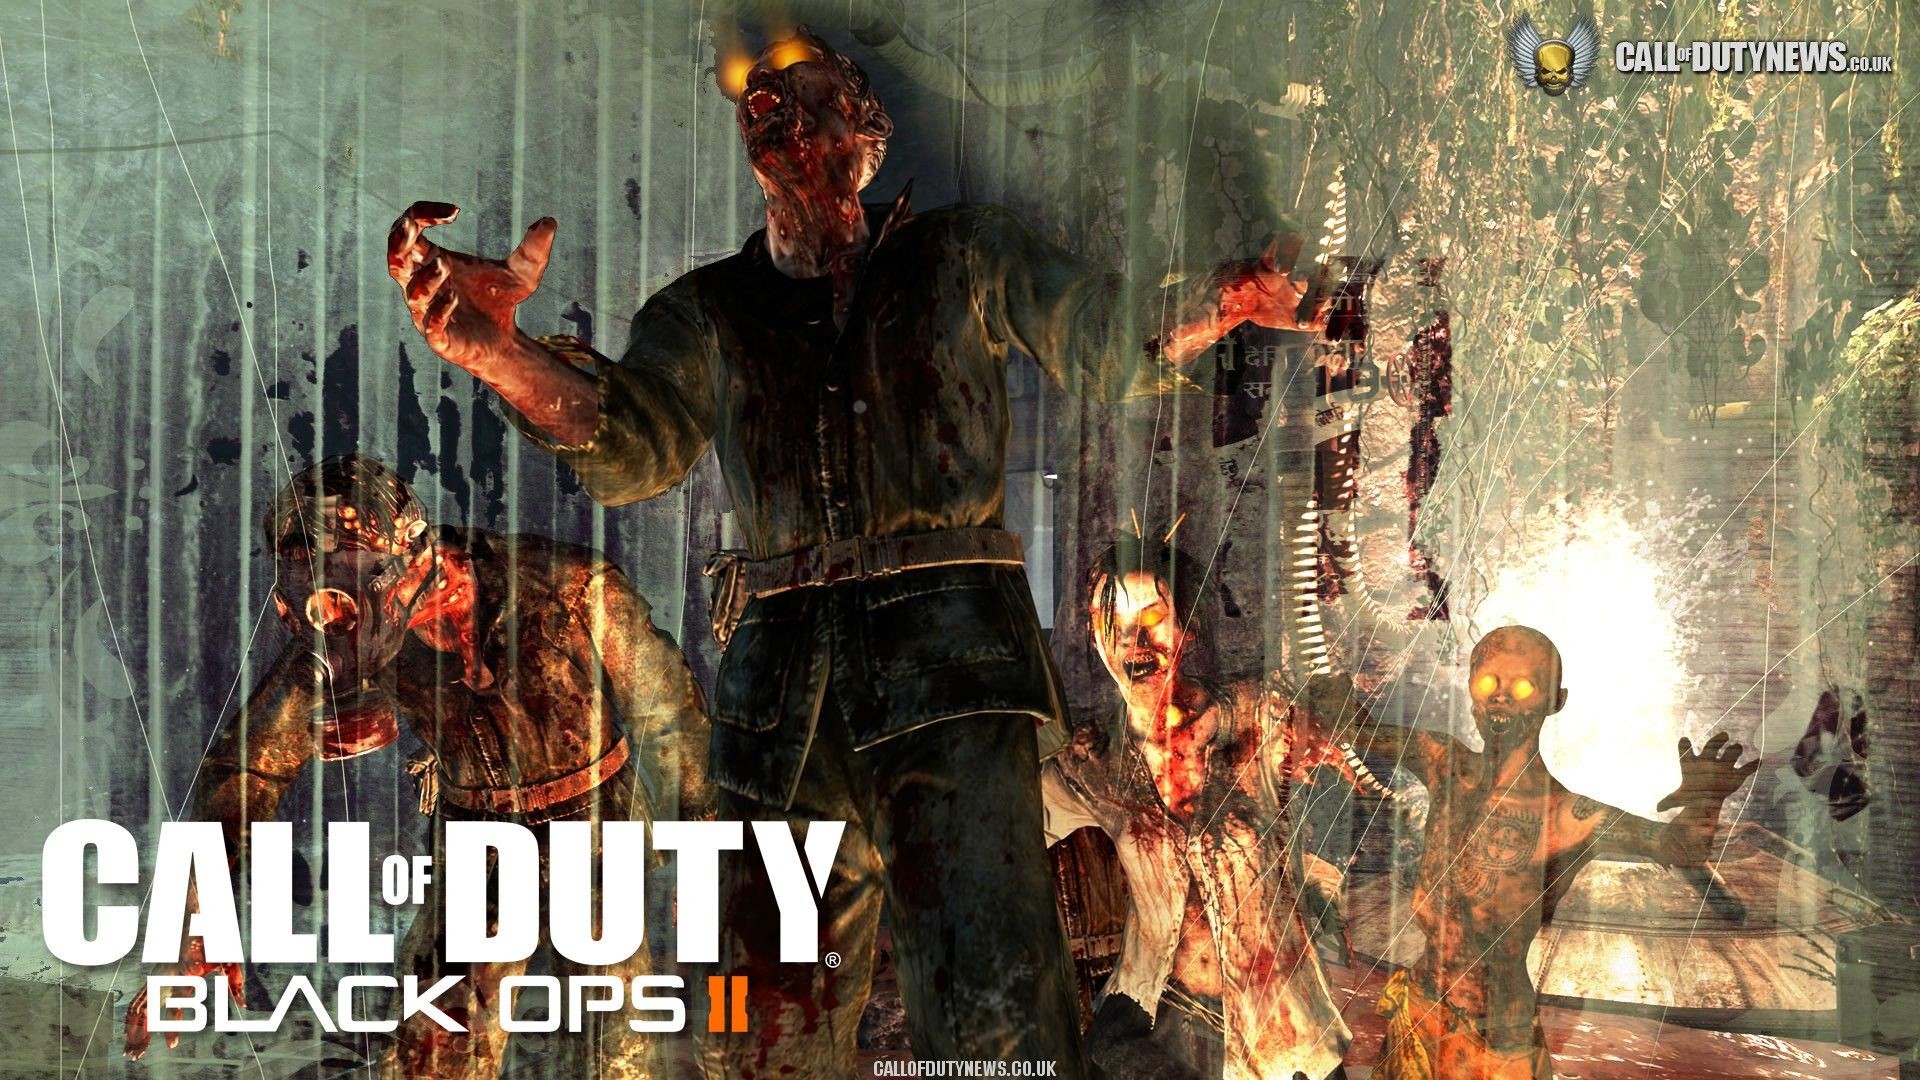 1920x1080 Call of duty black ops 3 zombies wallpaper – Free full hd .